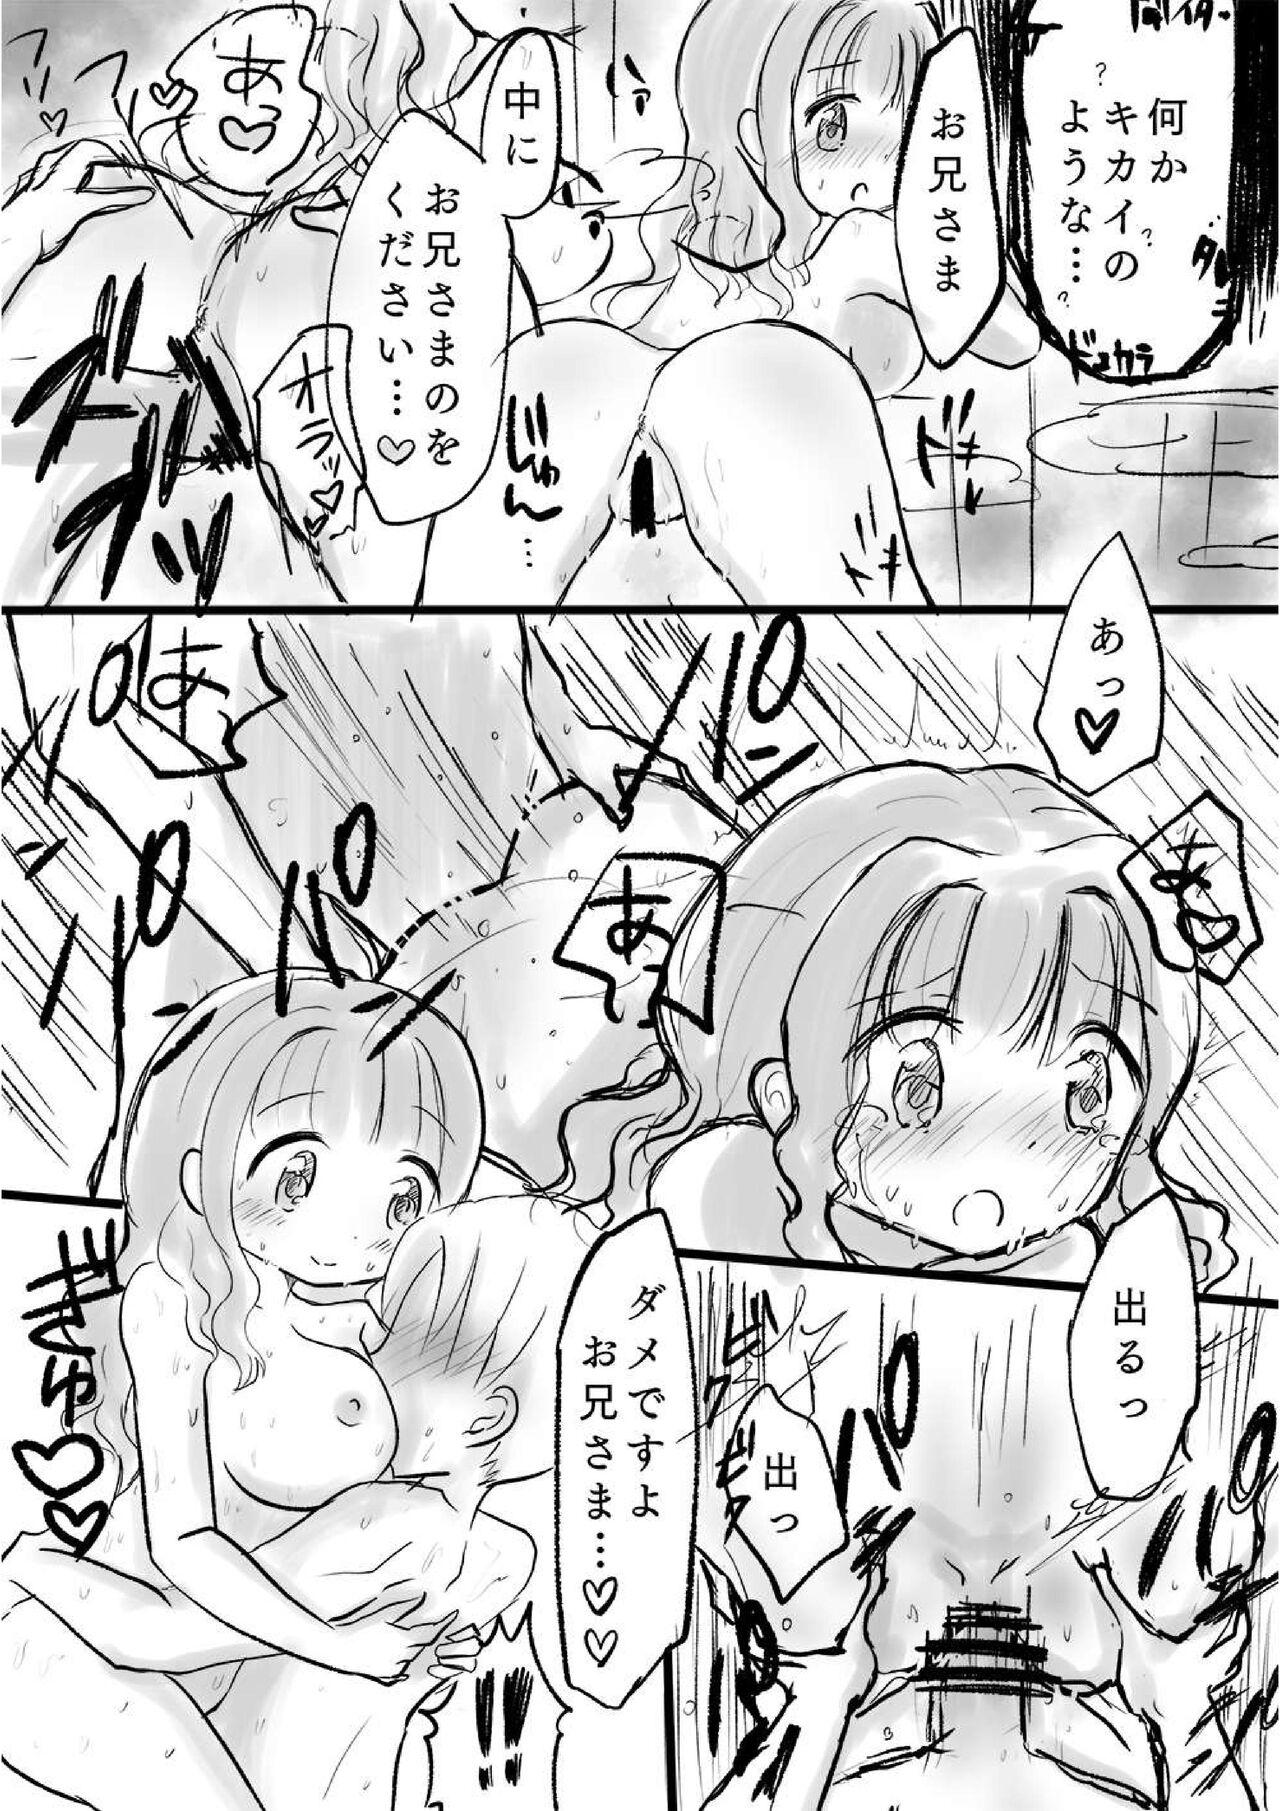 Pussy To Mouth Saihate no Uragawa. - Puella magi madoka magica side story magia record Amatures Gone Wild - Page 4